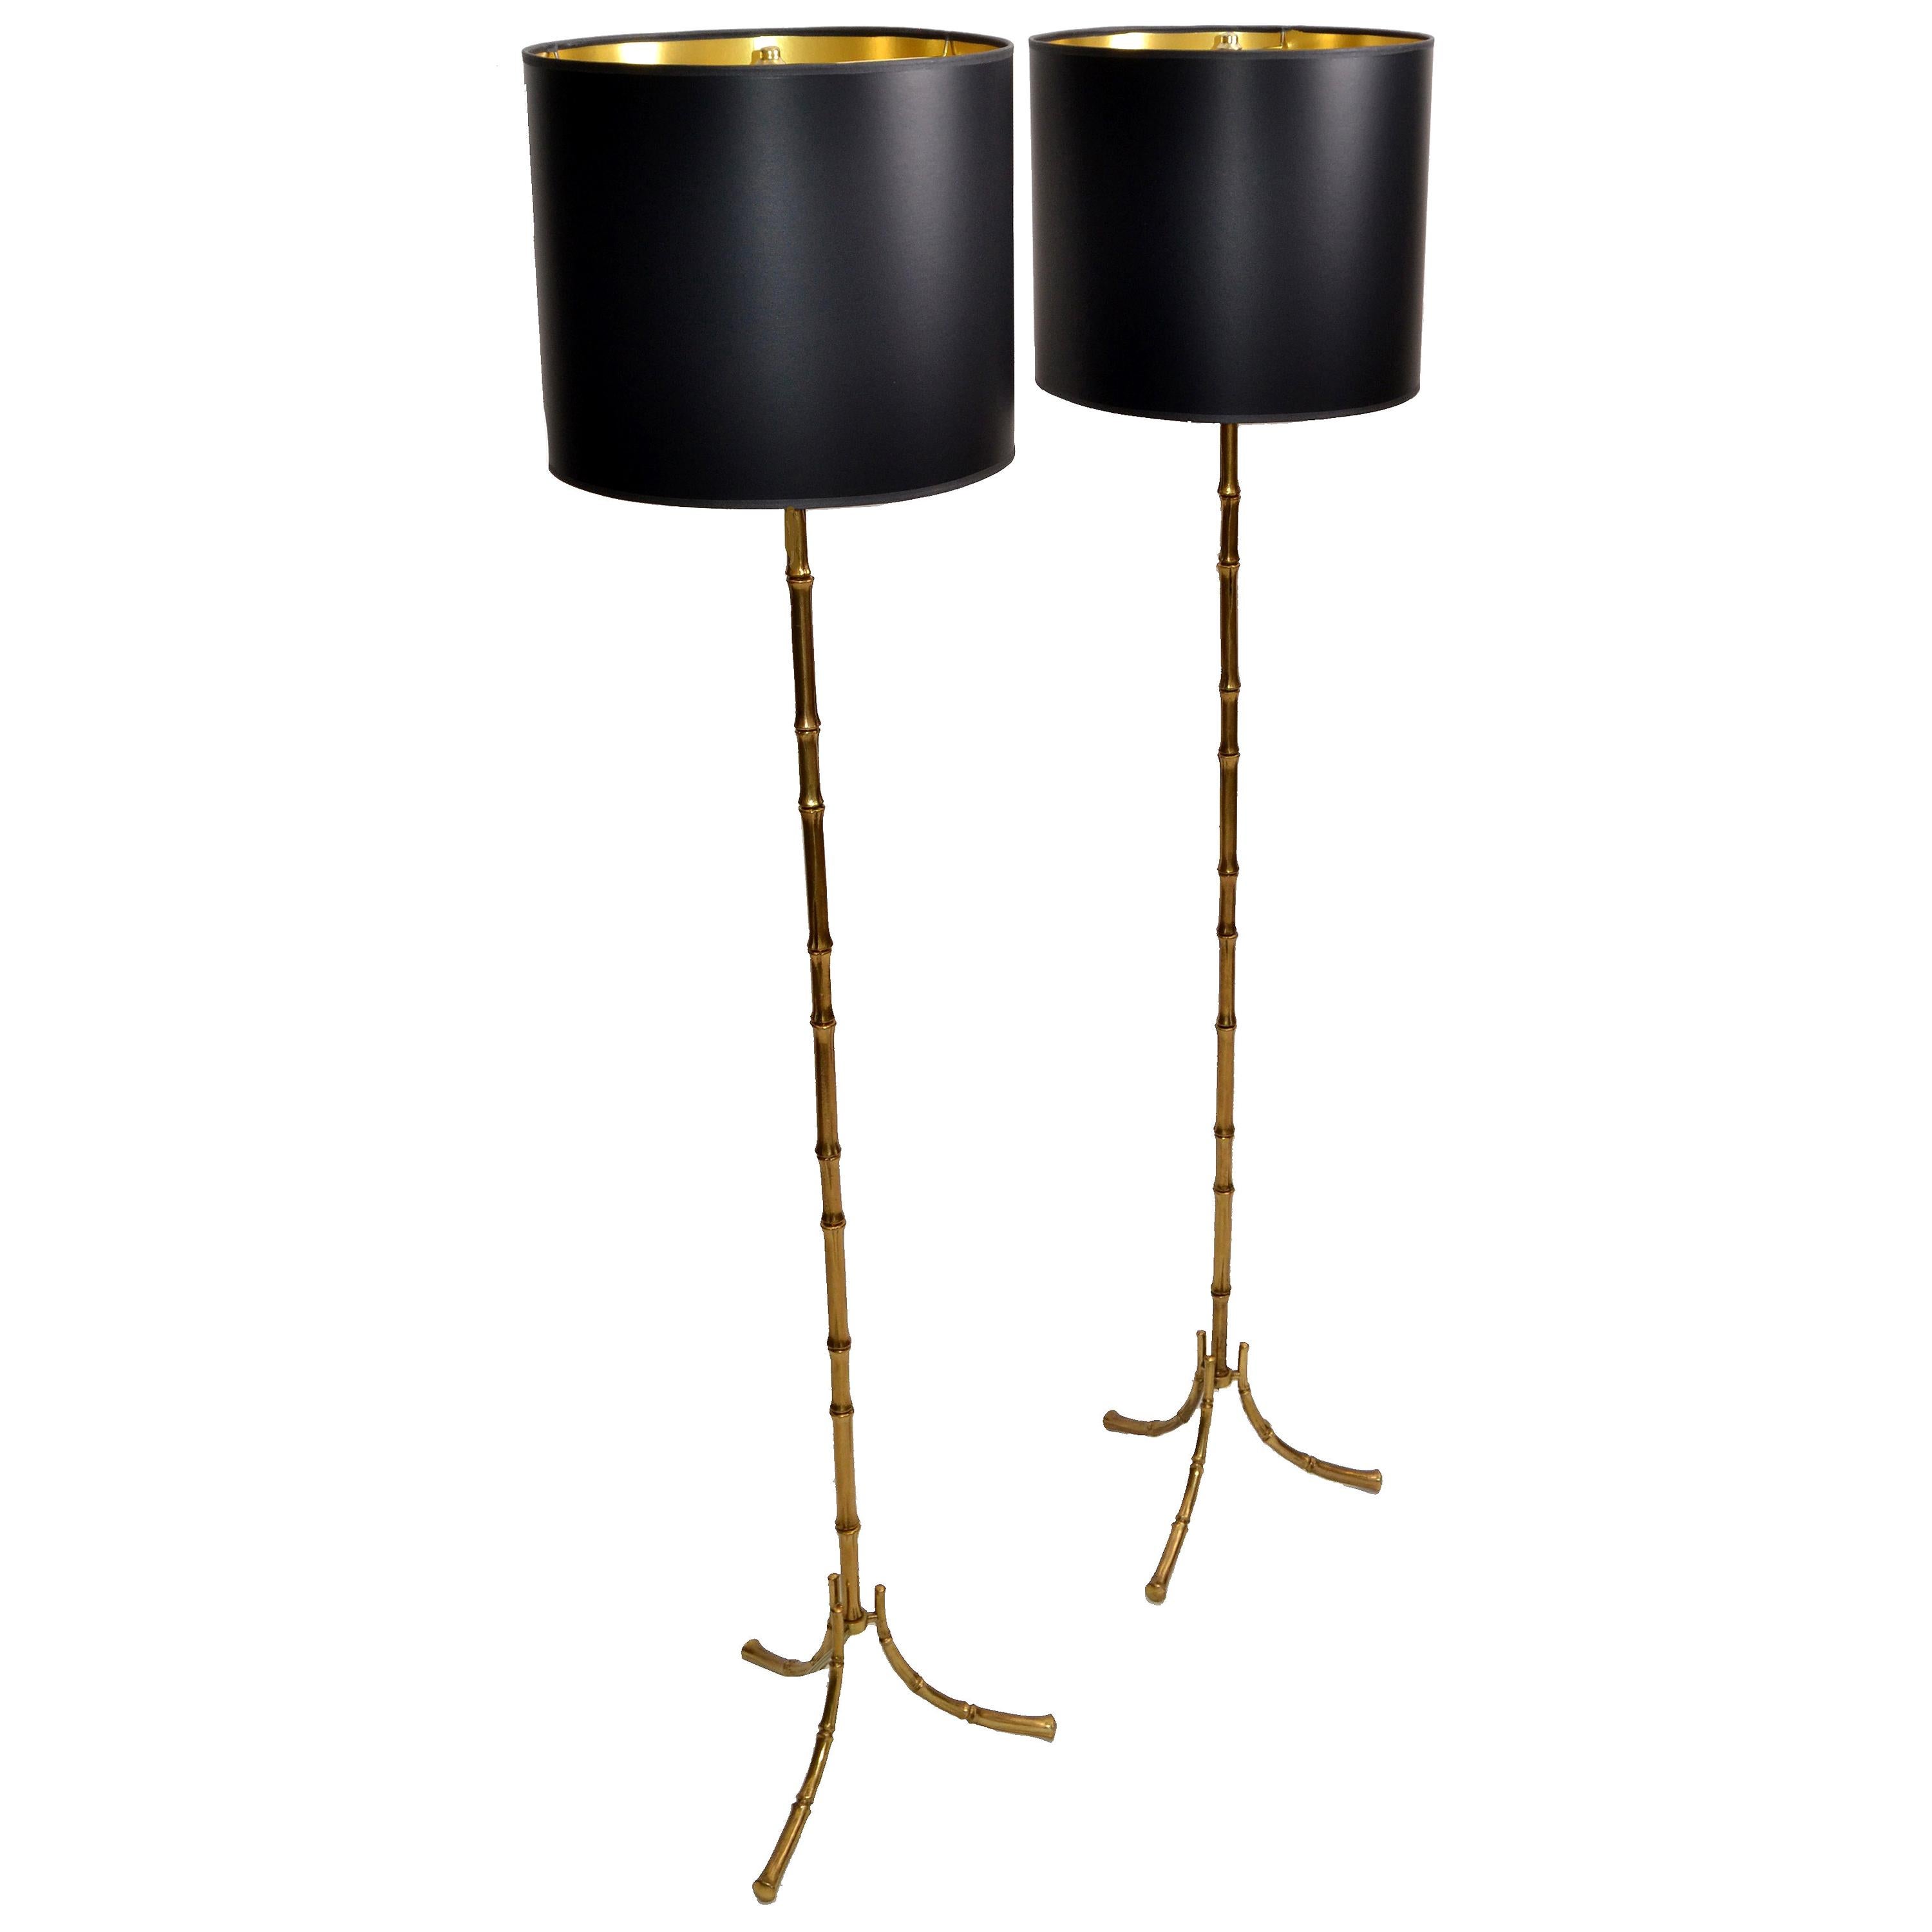 Maison Baguès French Hollywood Regency Bronze Faux Bamboo Floor Lamp 1960 - Pair